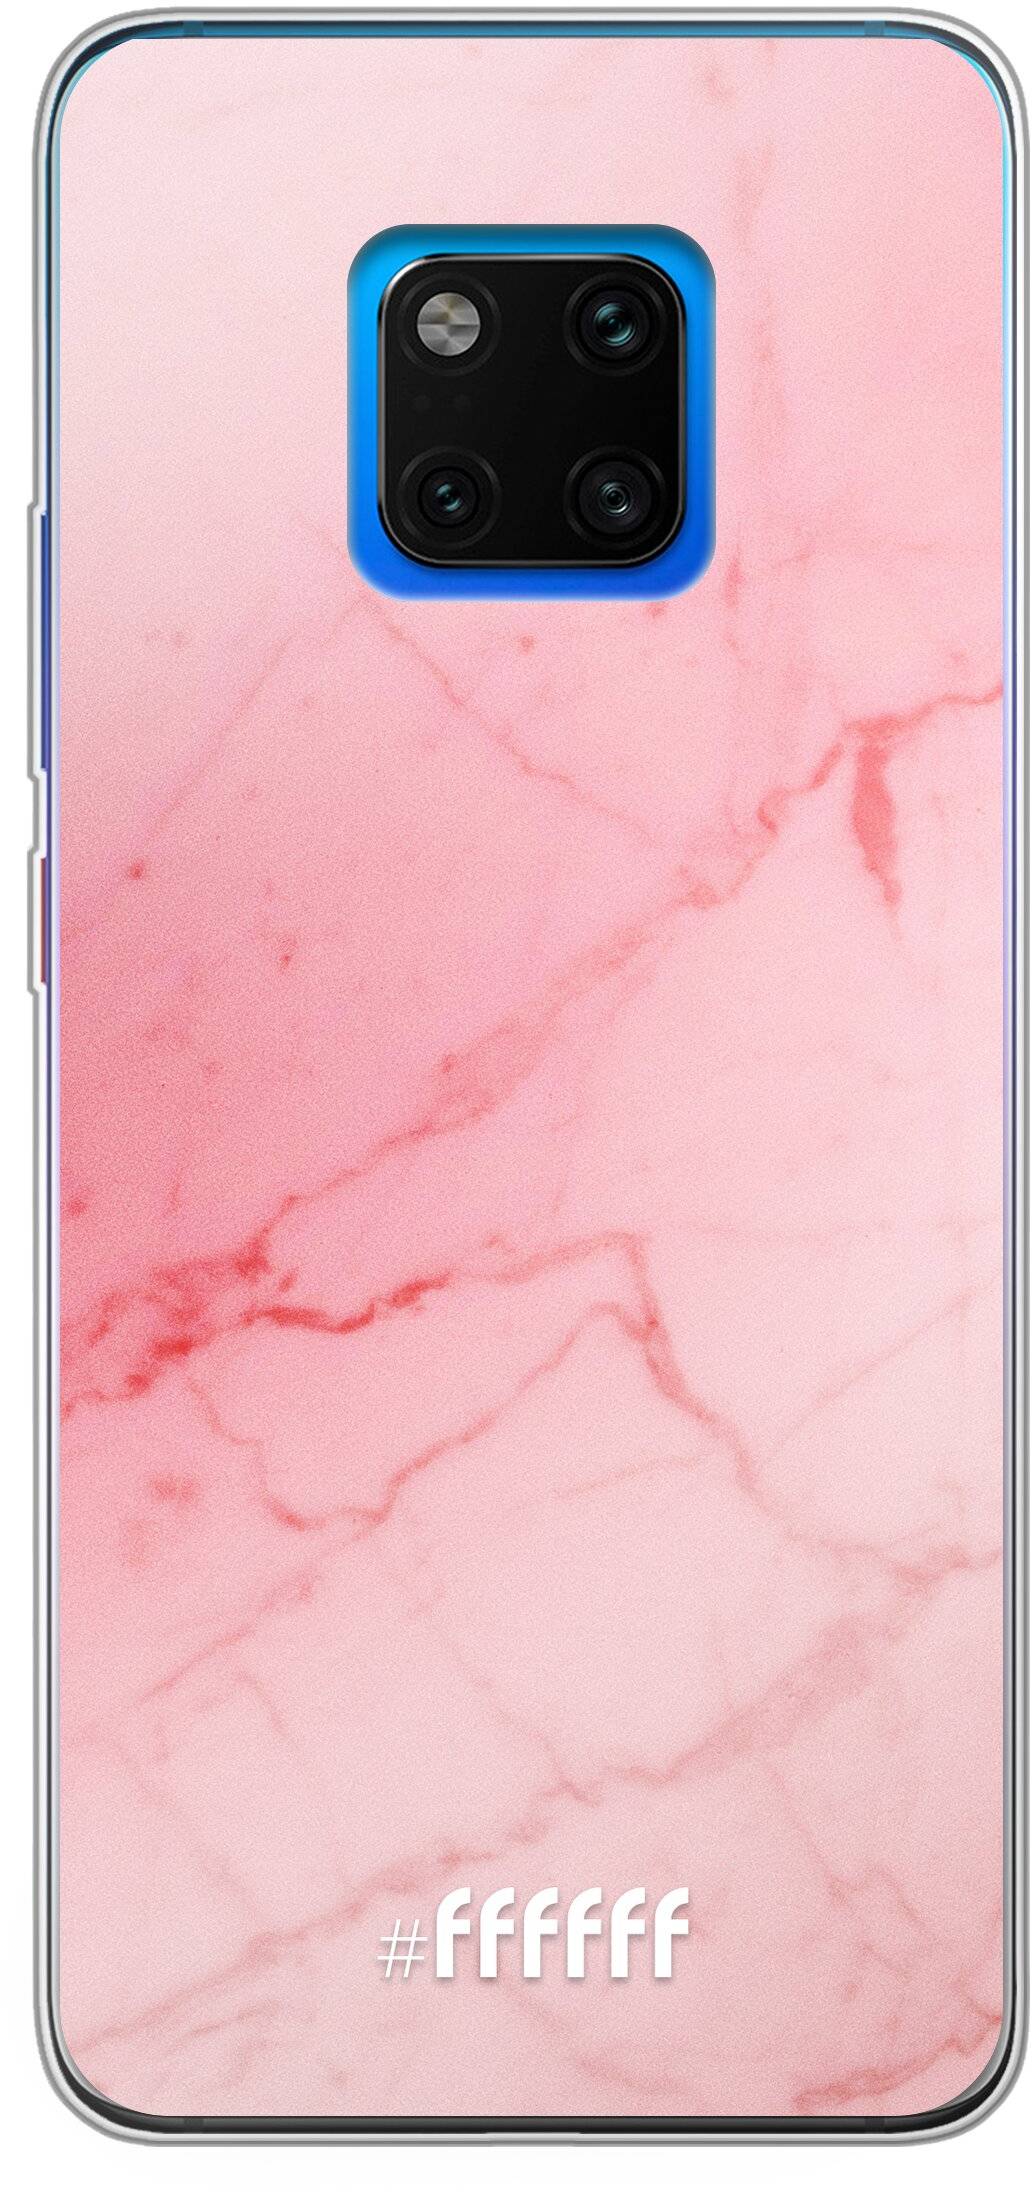 Coral Marble Mate 20 Pro